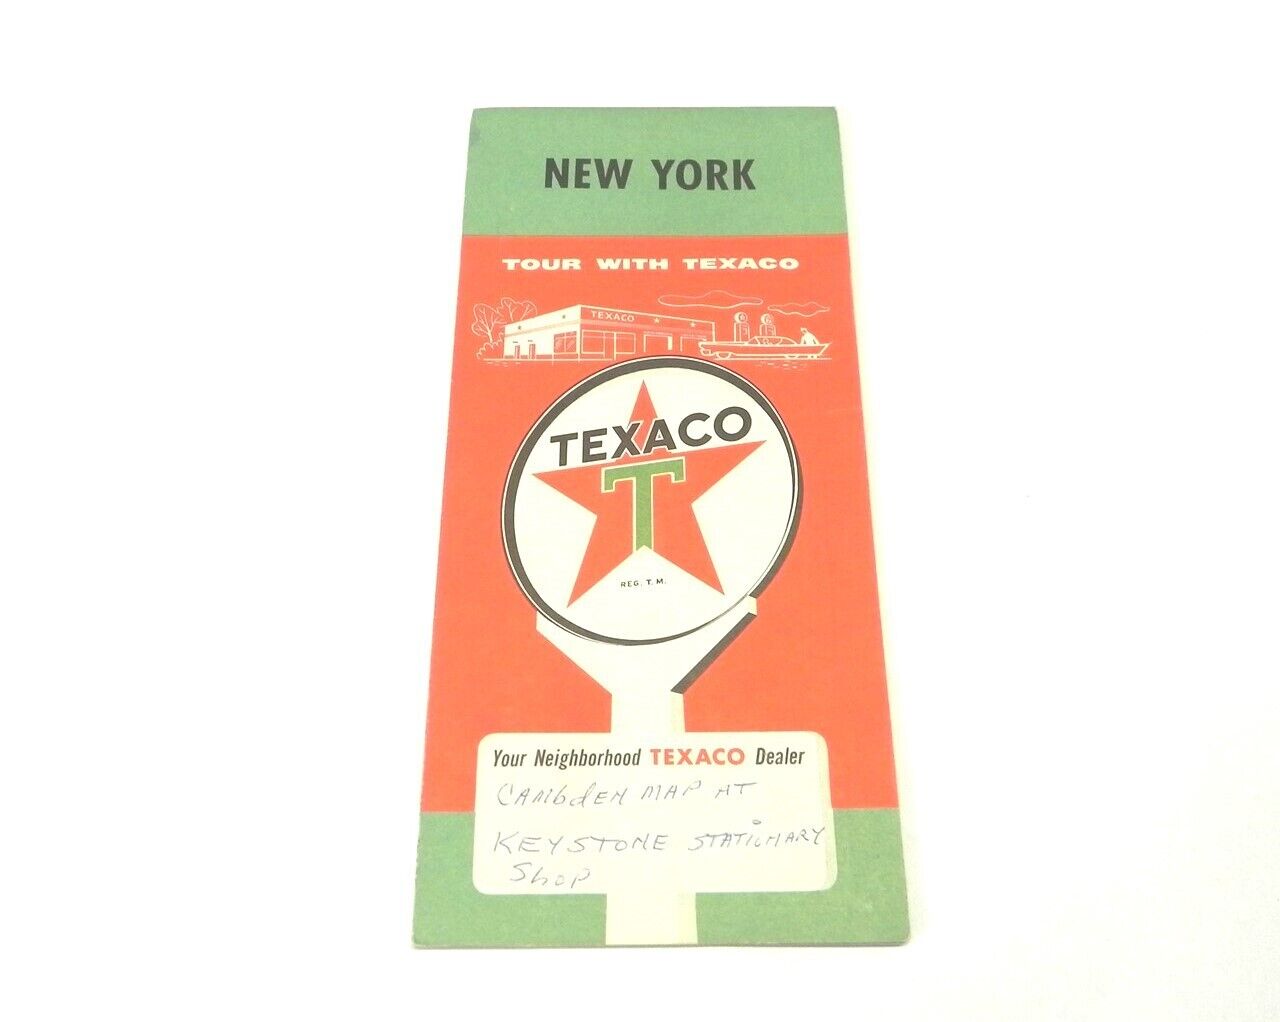 1959 TEXACO ROAD MAP OF NEW YORK -SOME WRITING ON THE FRONT- 